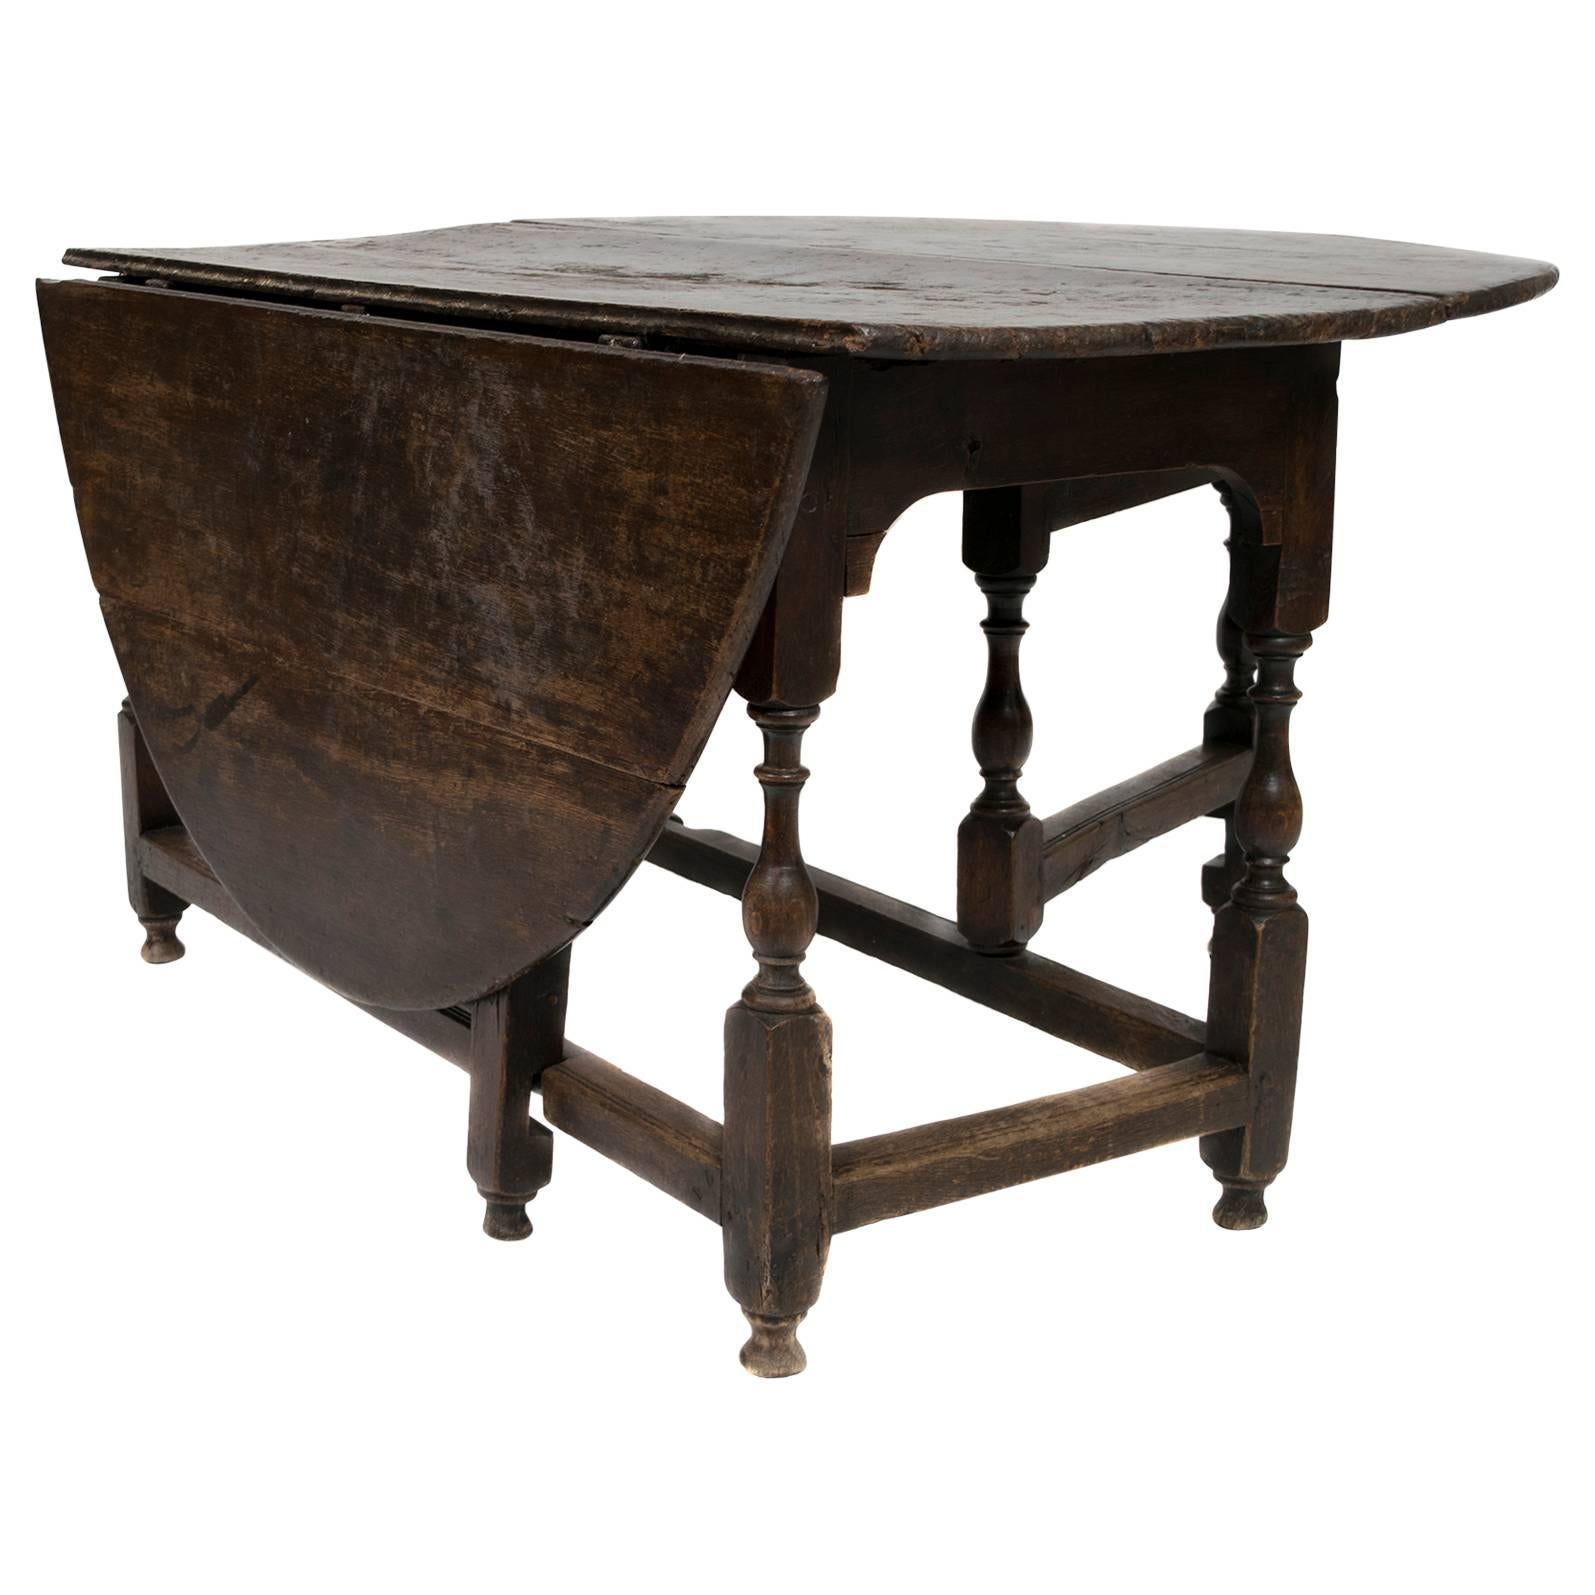 Early Georgian Drop-Leaf Oak Table with Turned Legs, circa 1750 For Sale